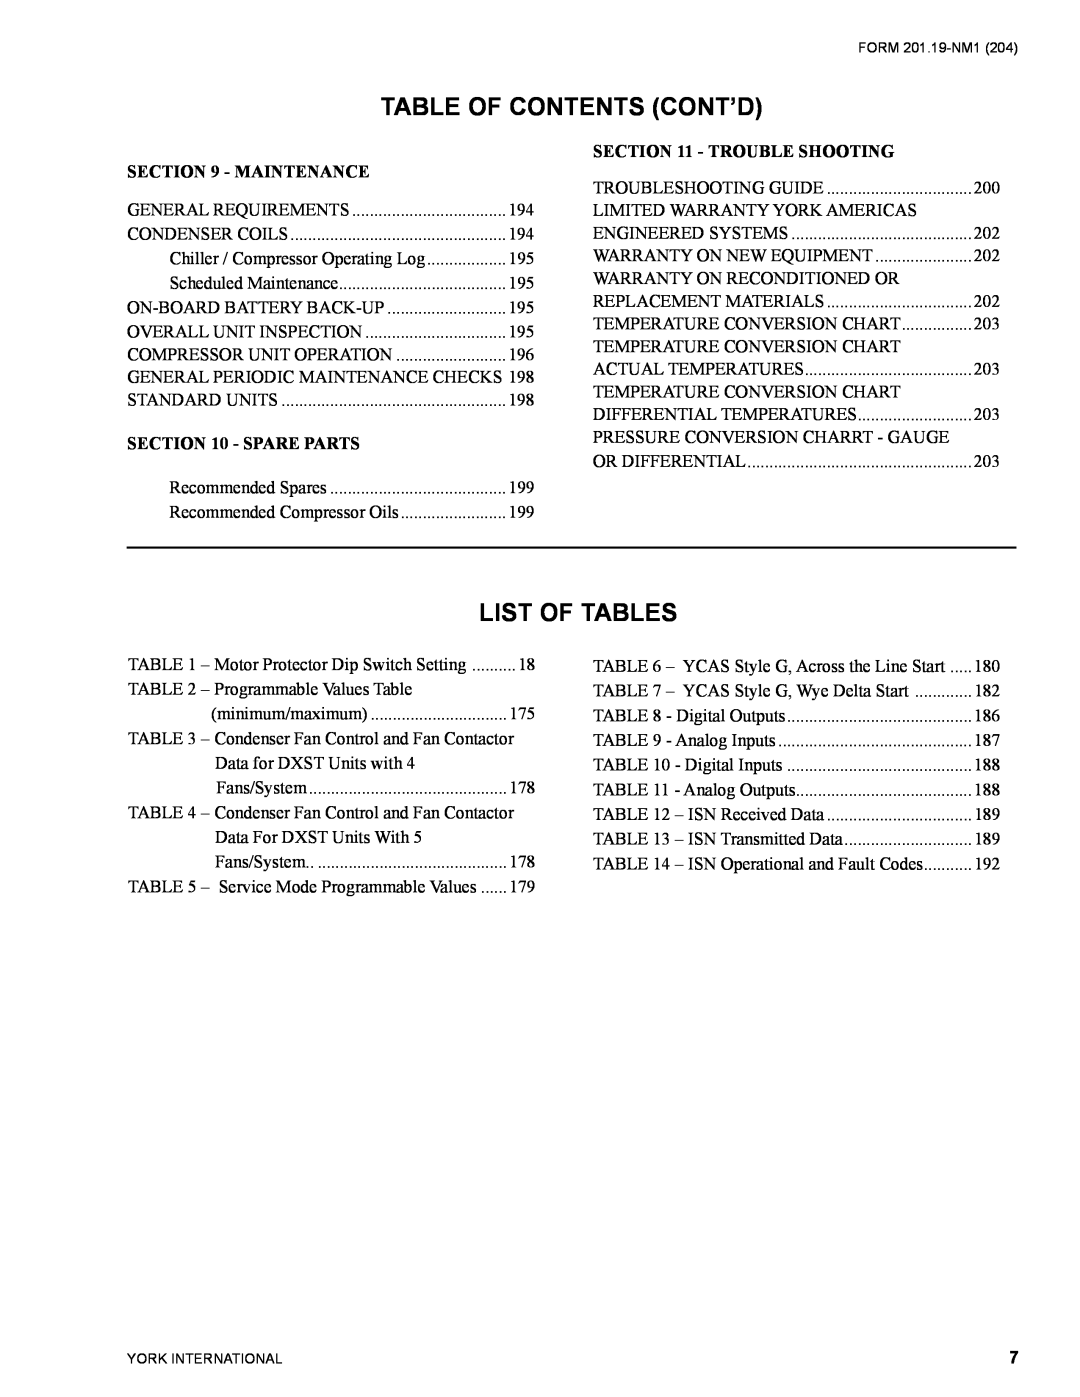 York YCAS0130 manual List Of Tables, Table Of Contents Cont’D, Maintenance, Spare Parts, Trouble Shooting 